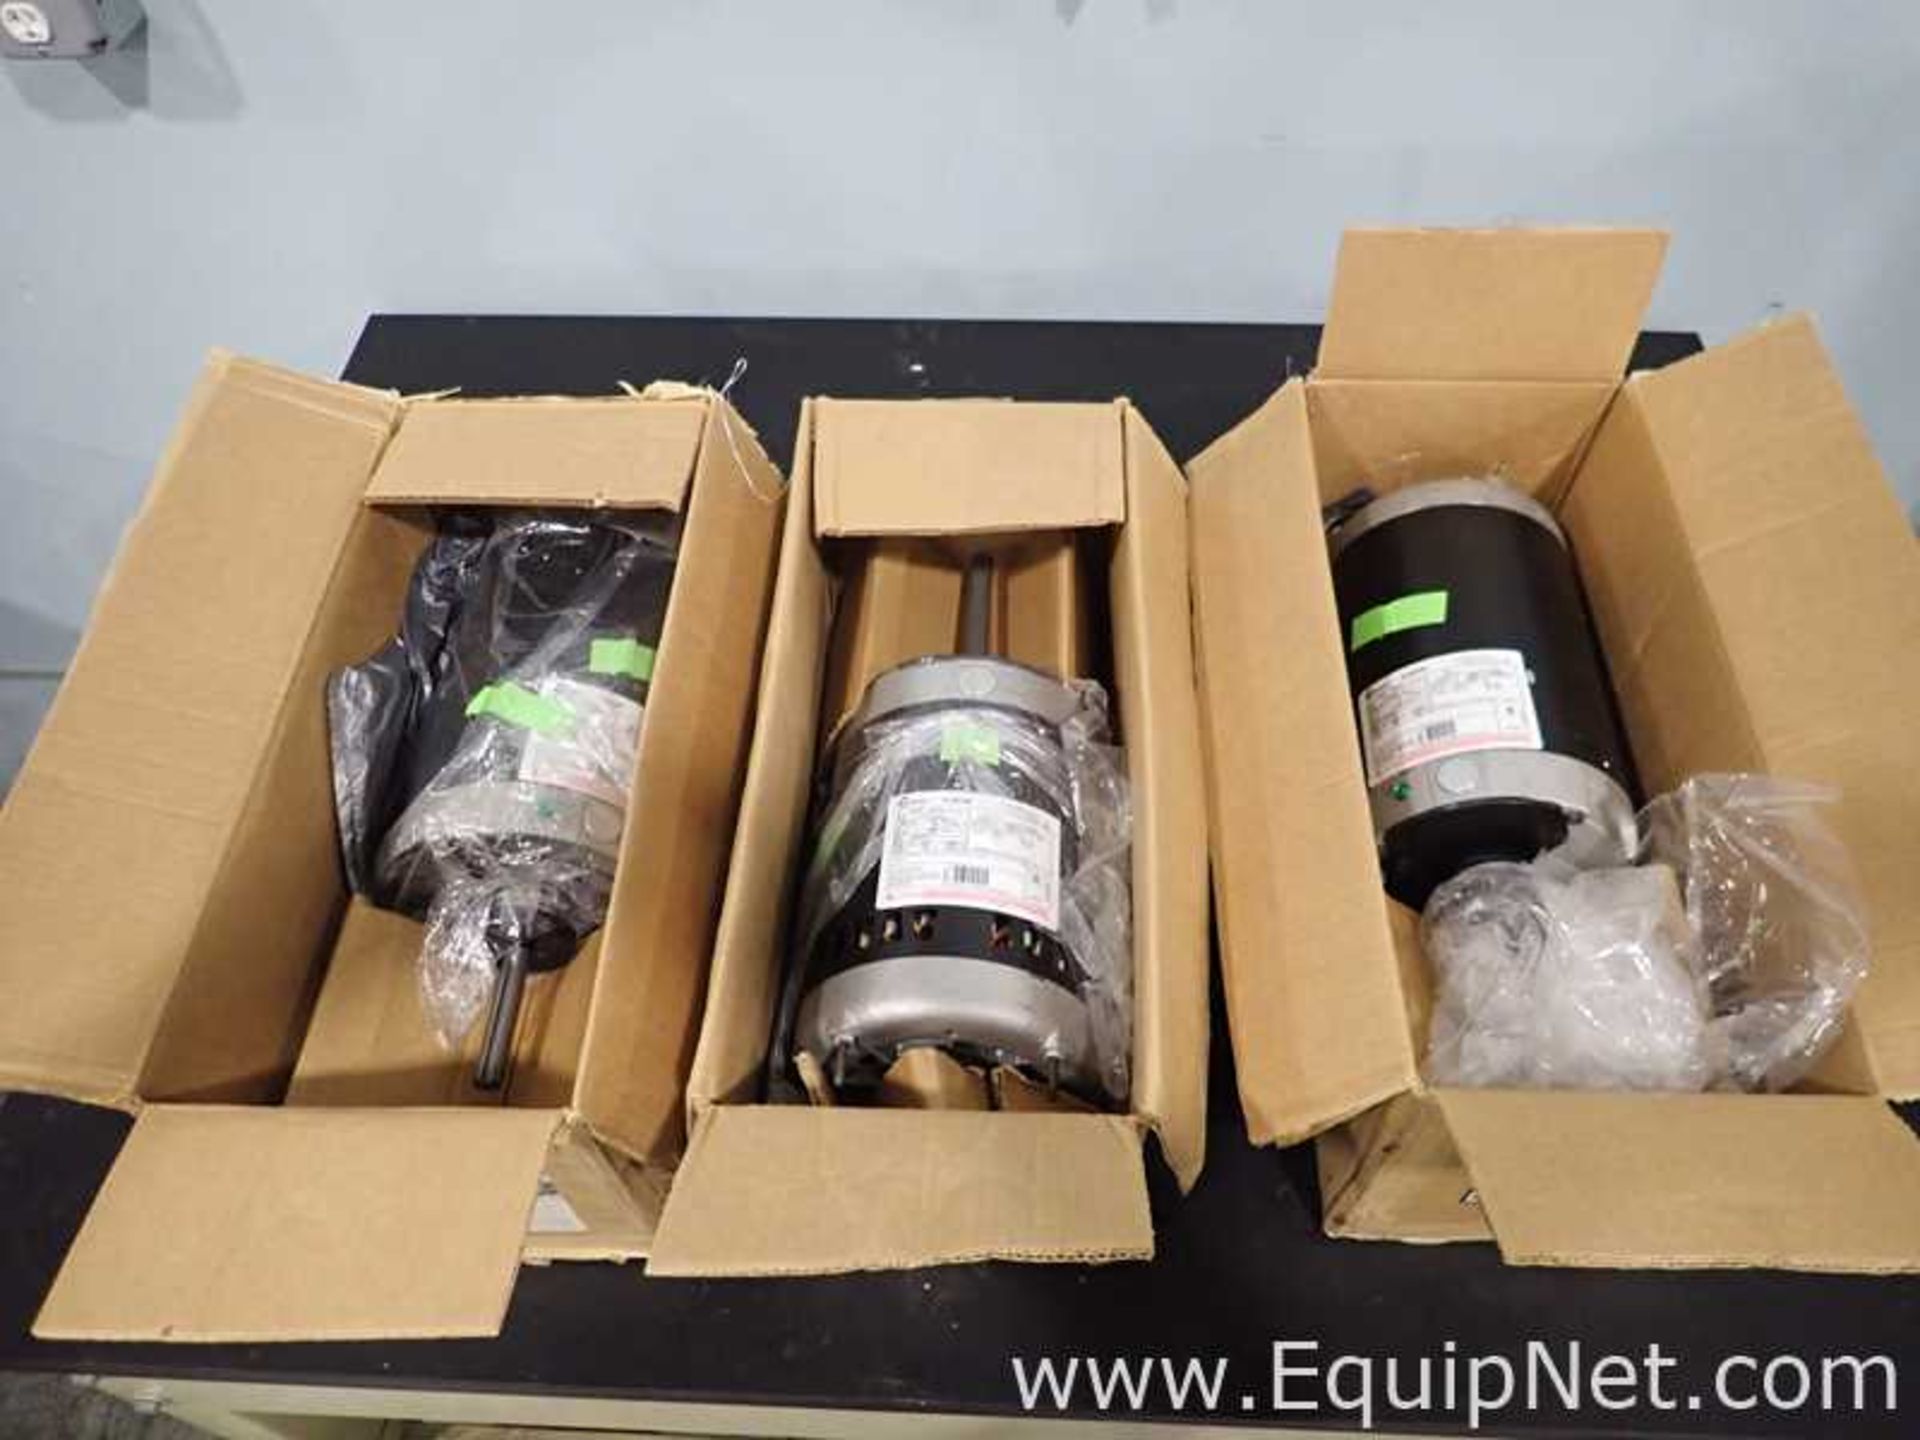 EQUIPNET LISTING #793359; REMOVAL COST: $25; DESCRIPTION: Unused Lot of 3 Century Electric Motor